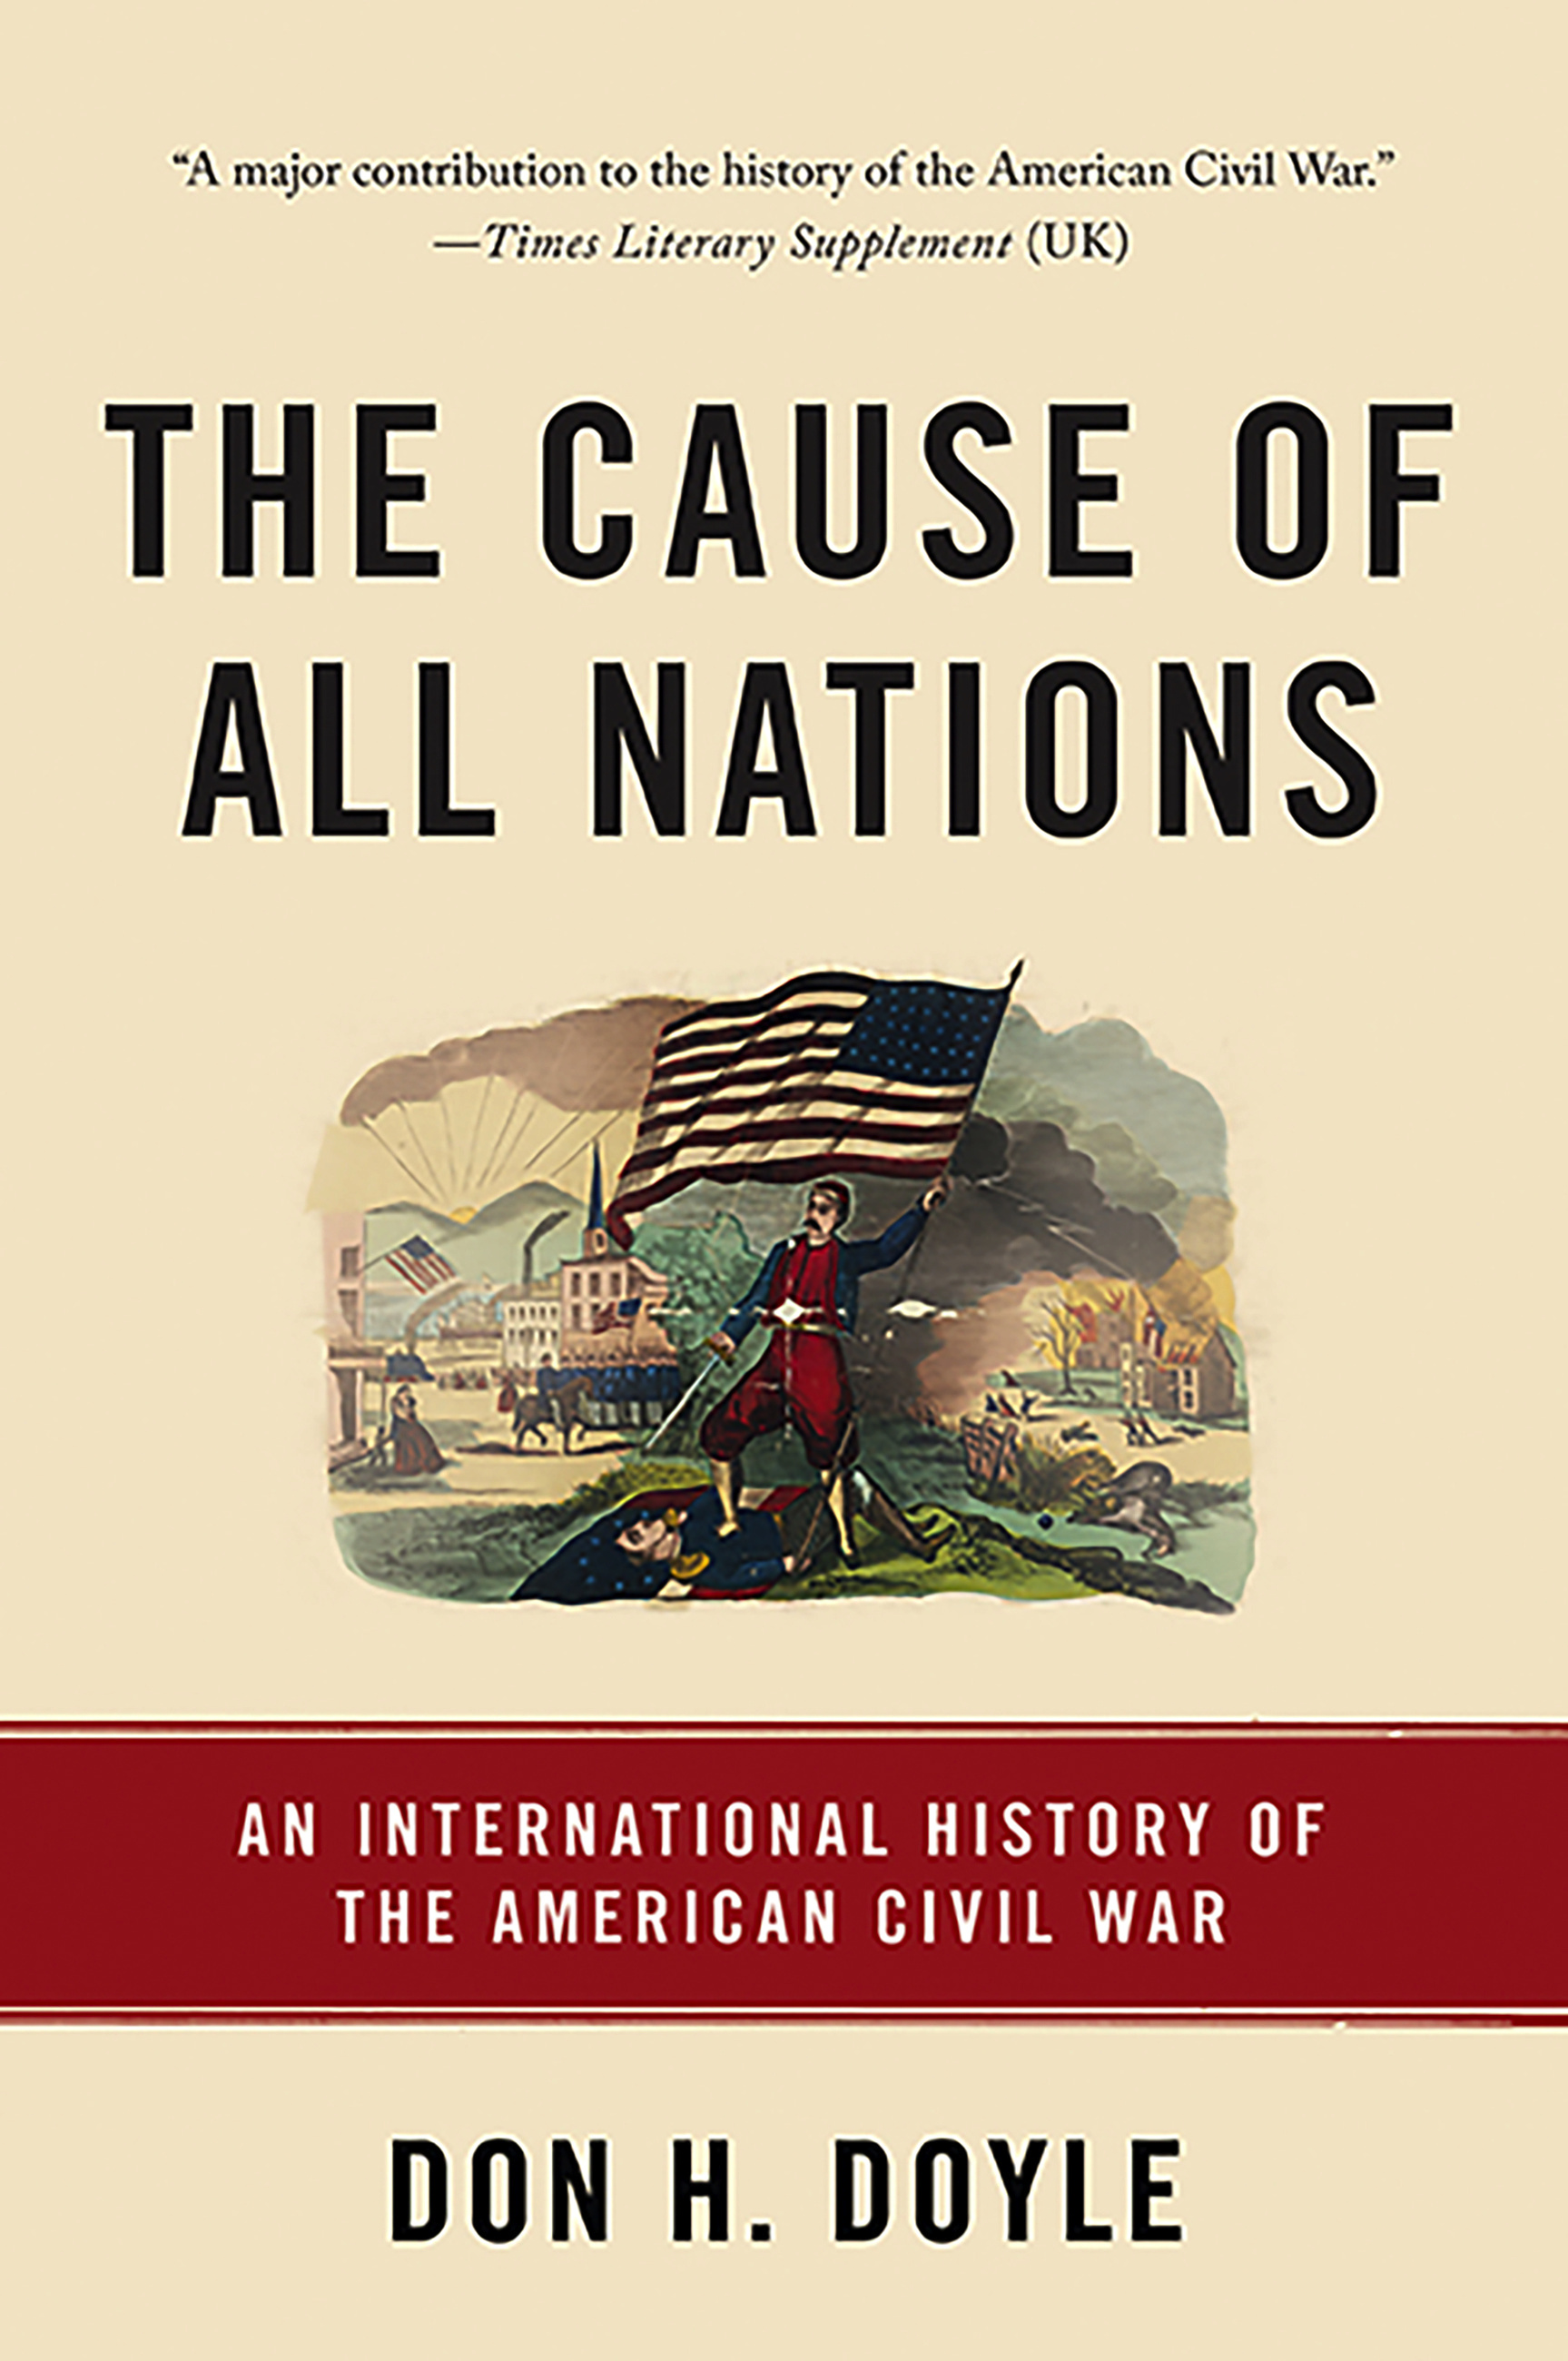 Don　Doyle　of　Nations　Book　The　Cause　H.　Hachette　All　by　Group